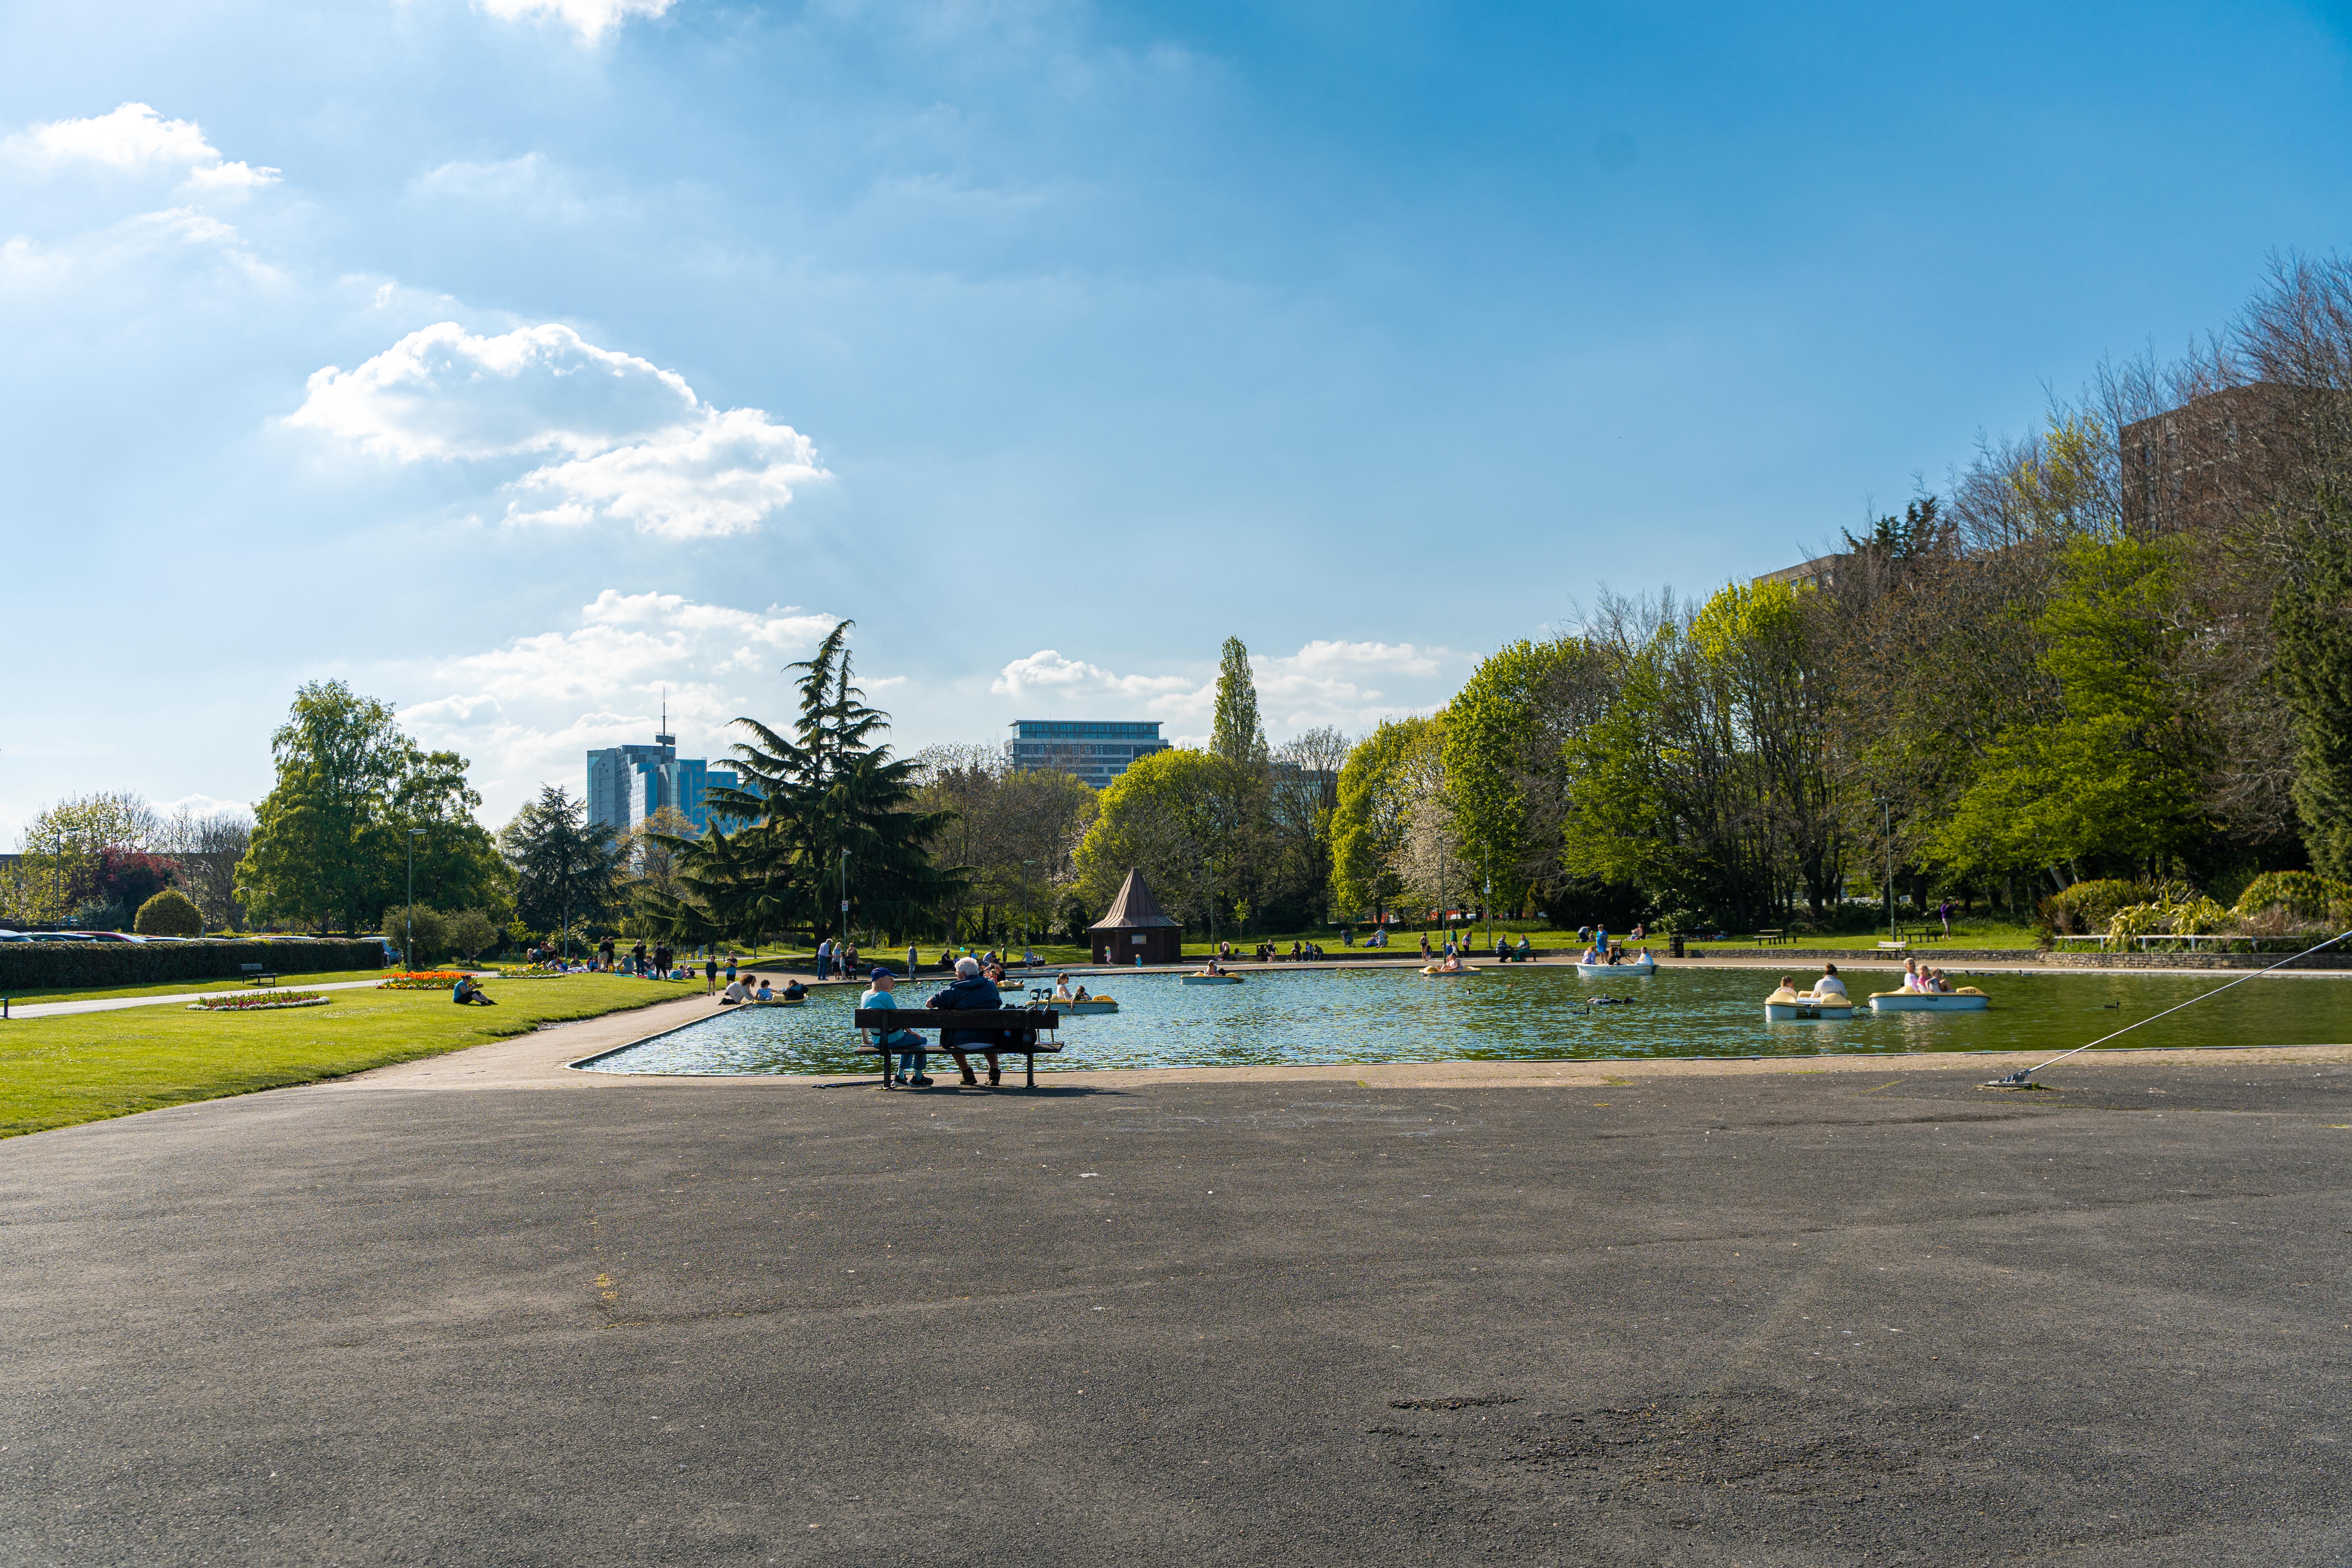 Image shows groups of people enjoying a park, boating lake and picnic areas on a sunny day.